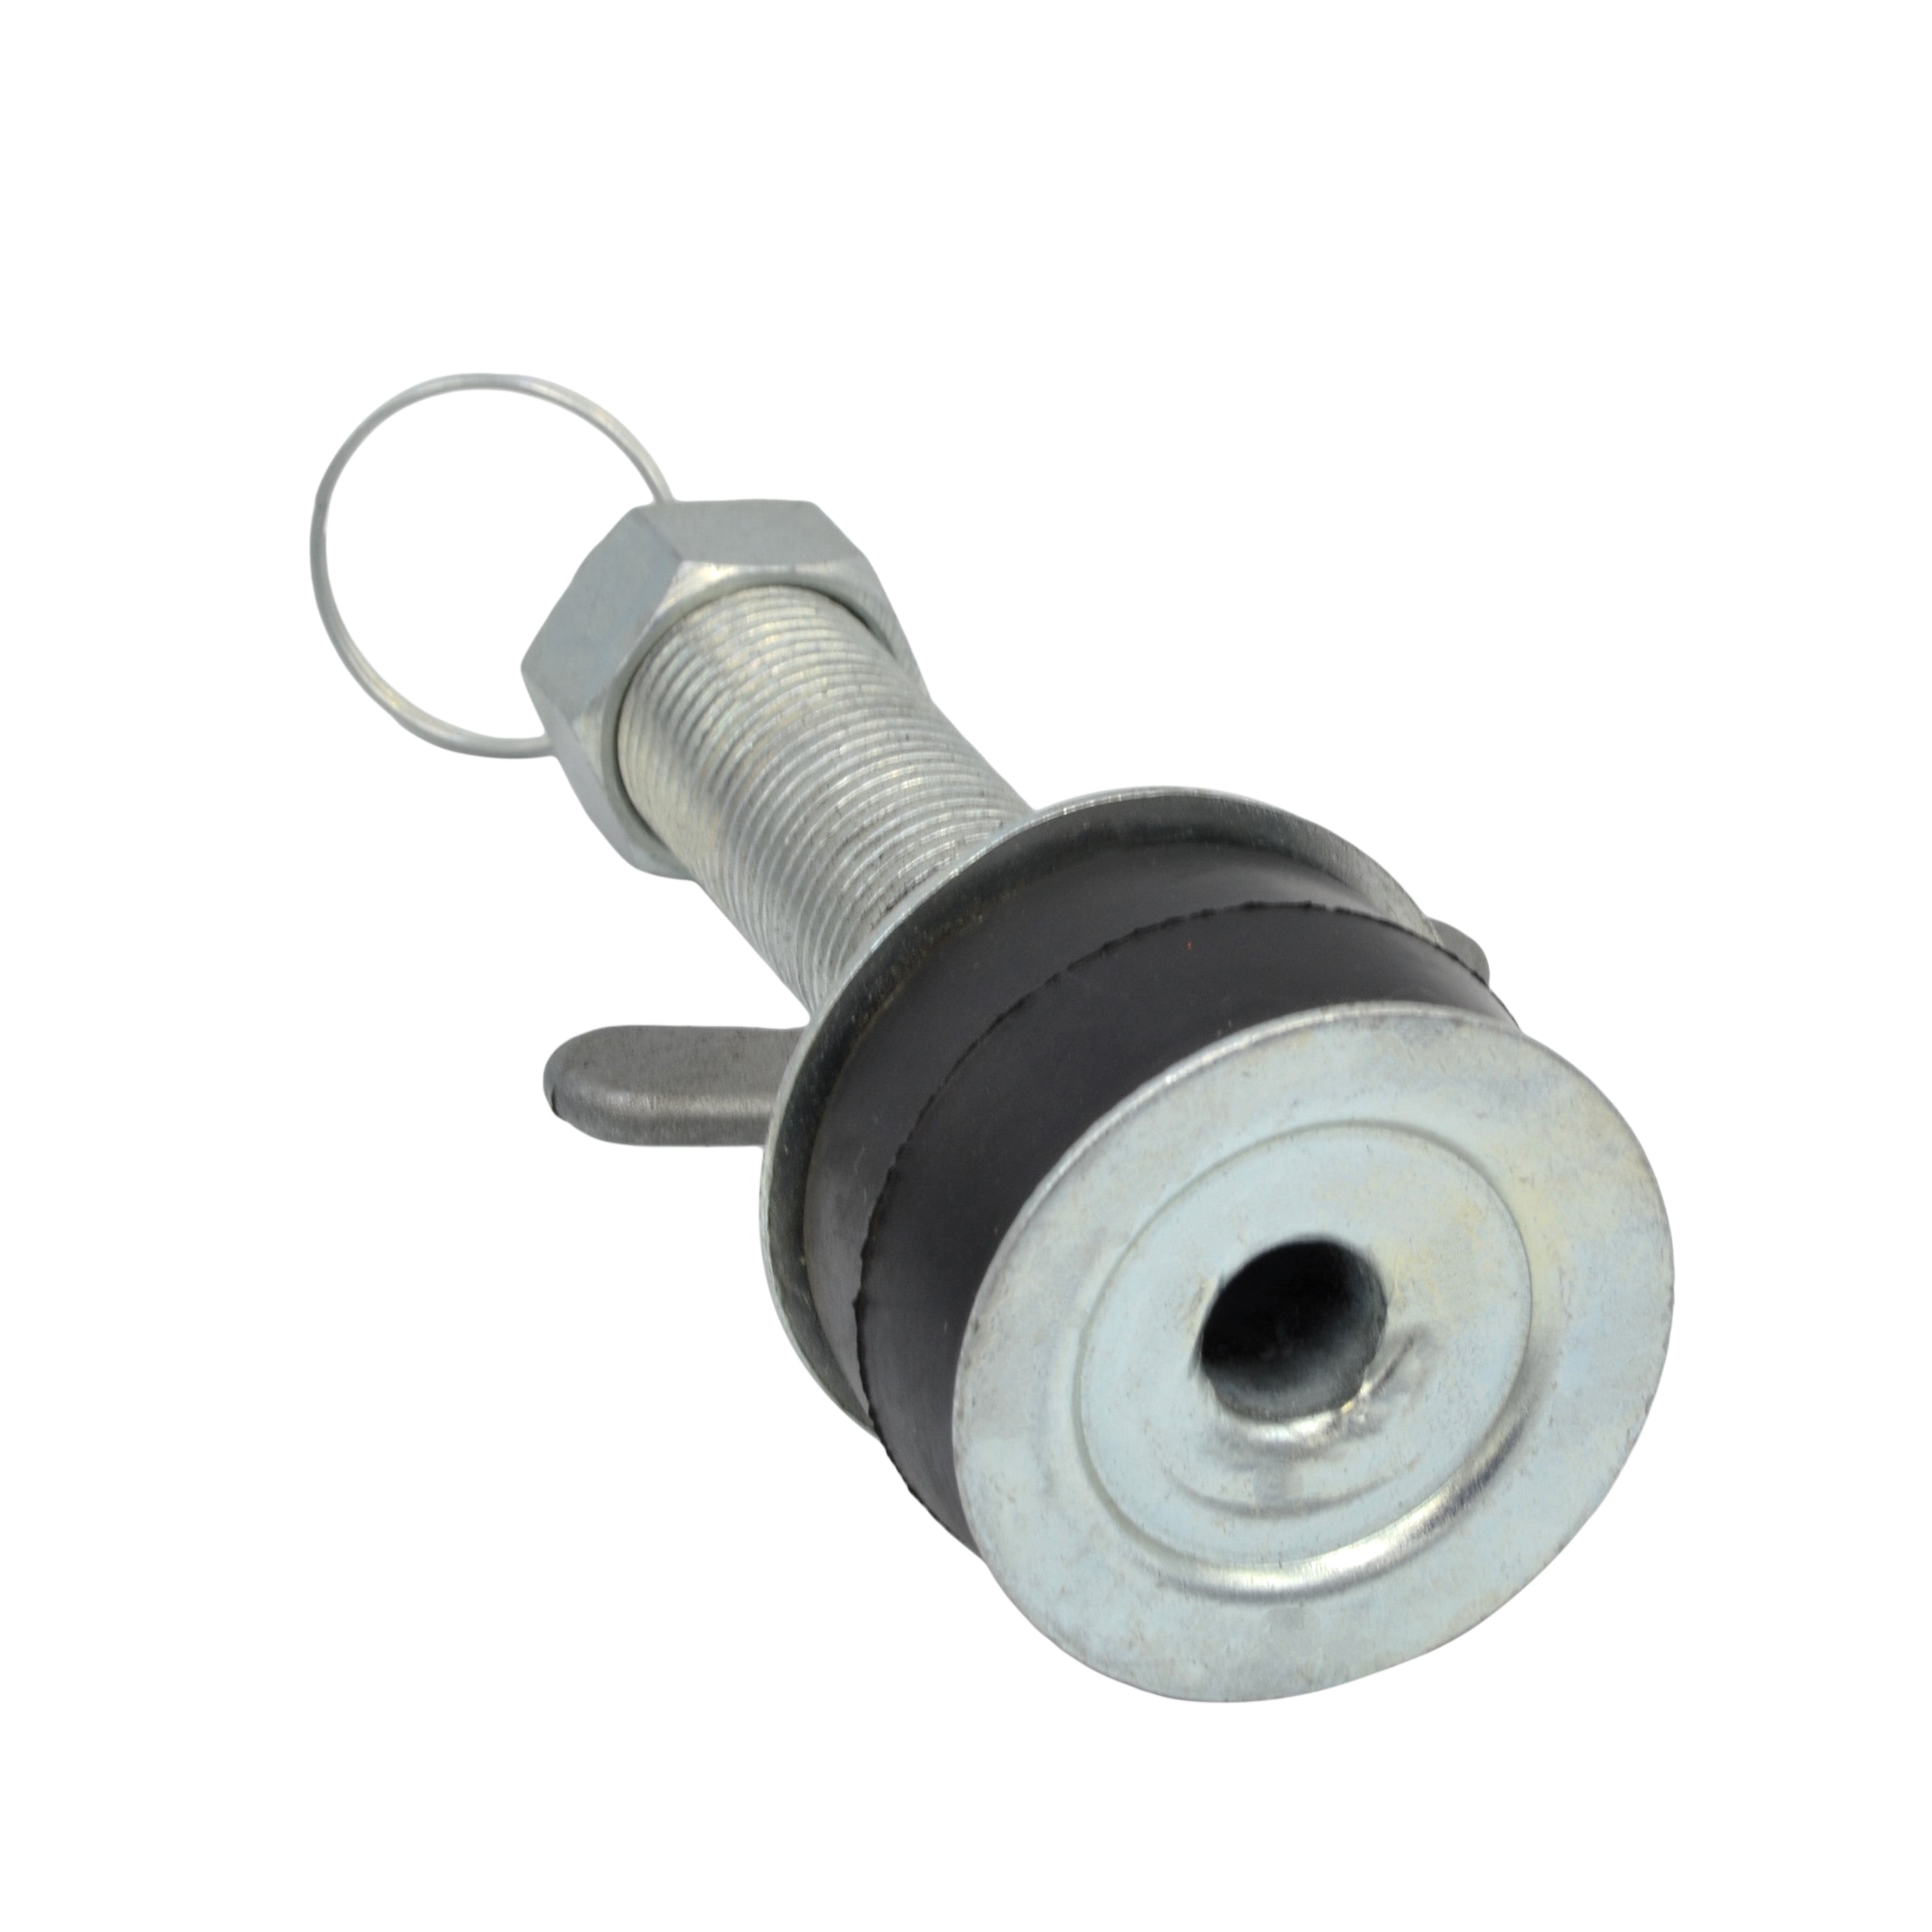 2" 50 mm Steel expanding plug with 1/2 bypass 50-63 mm Range